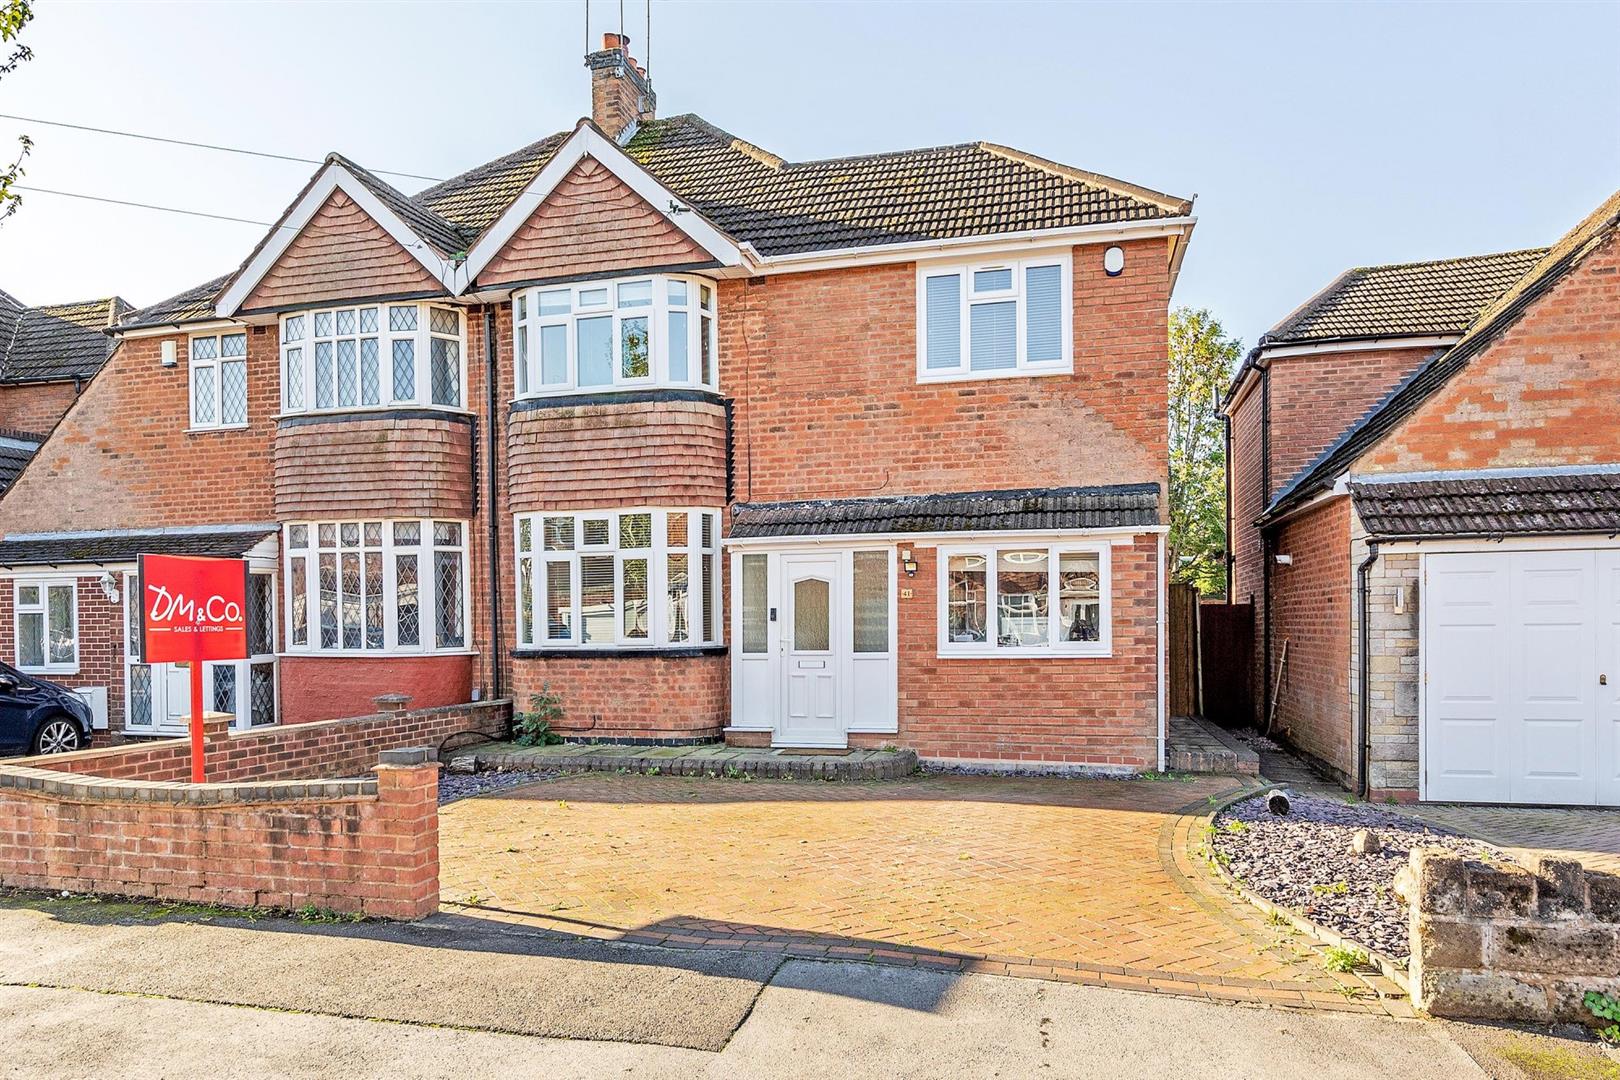 4 bed  for sale in Charles Road, Solihull, B91 